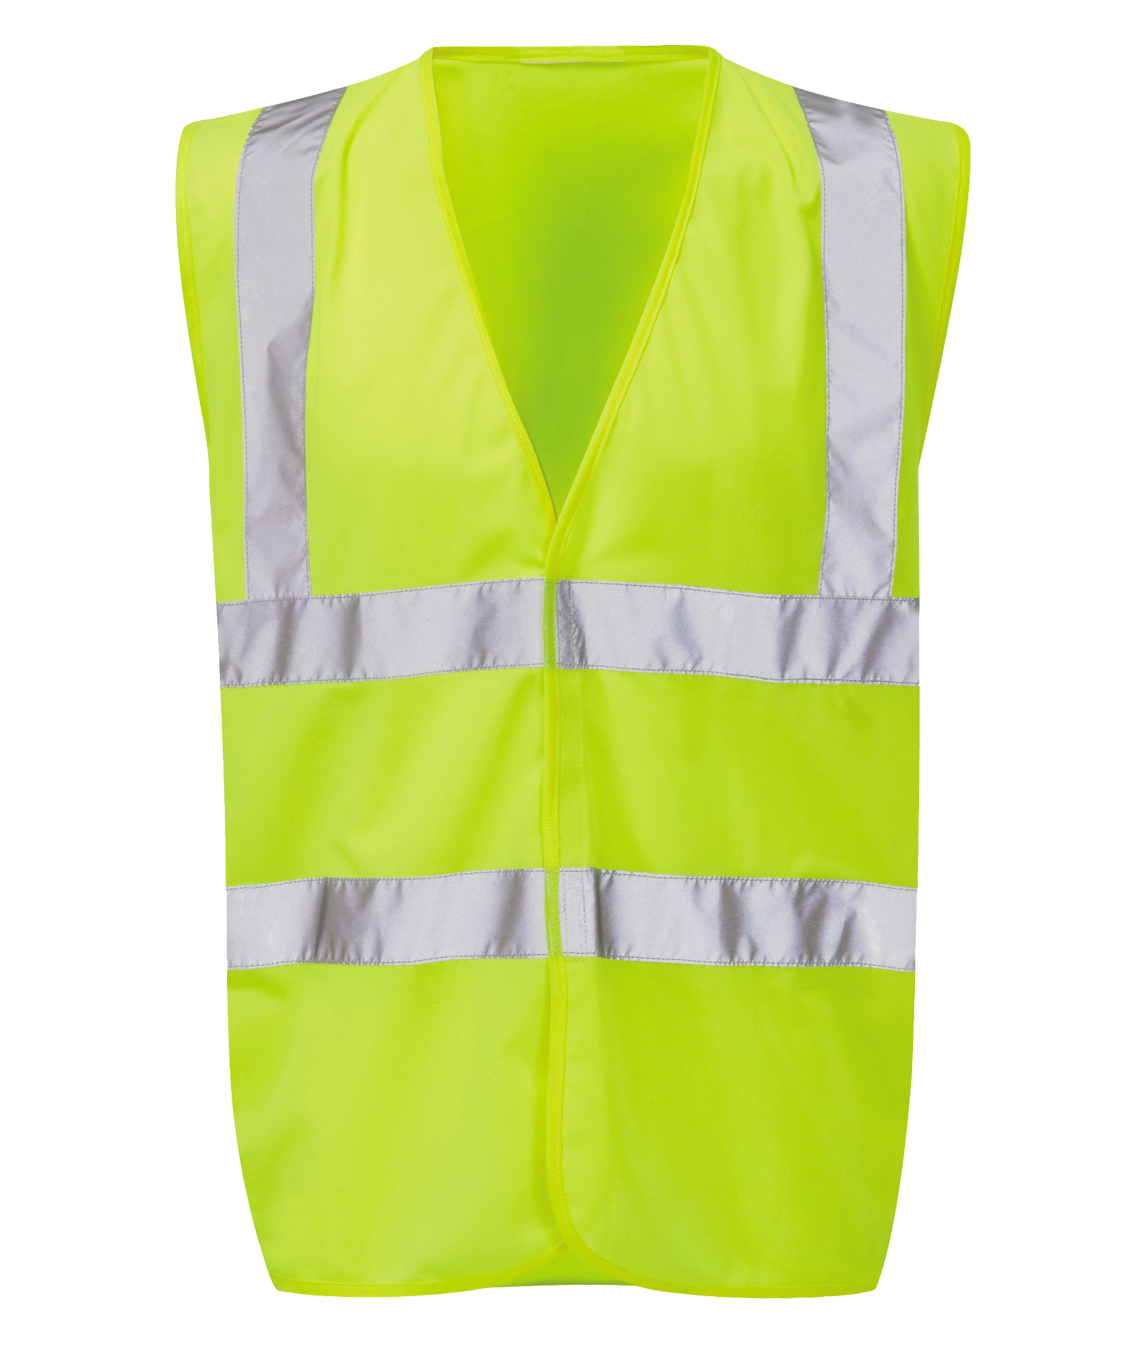 Personalised Hi-Visibility Safety Vests